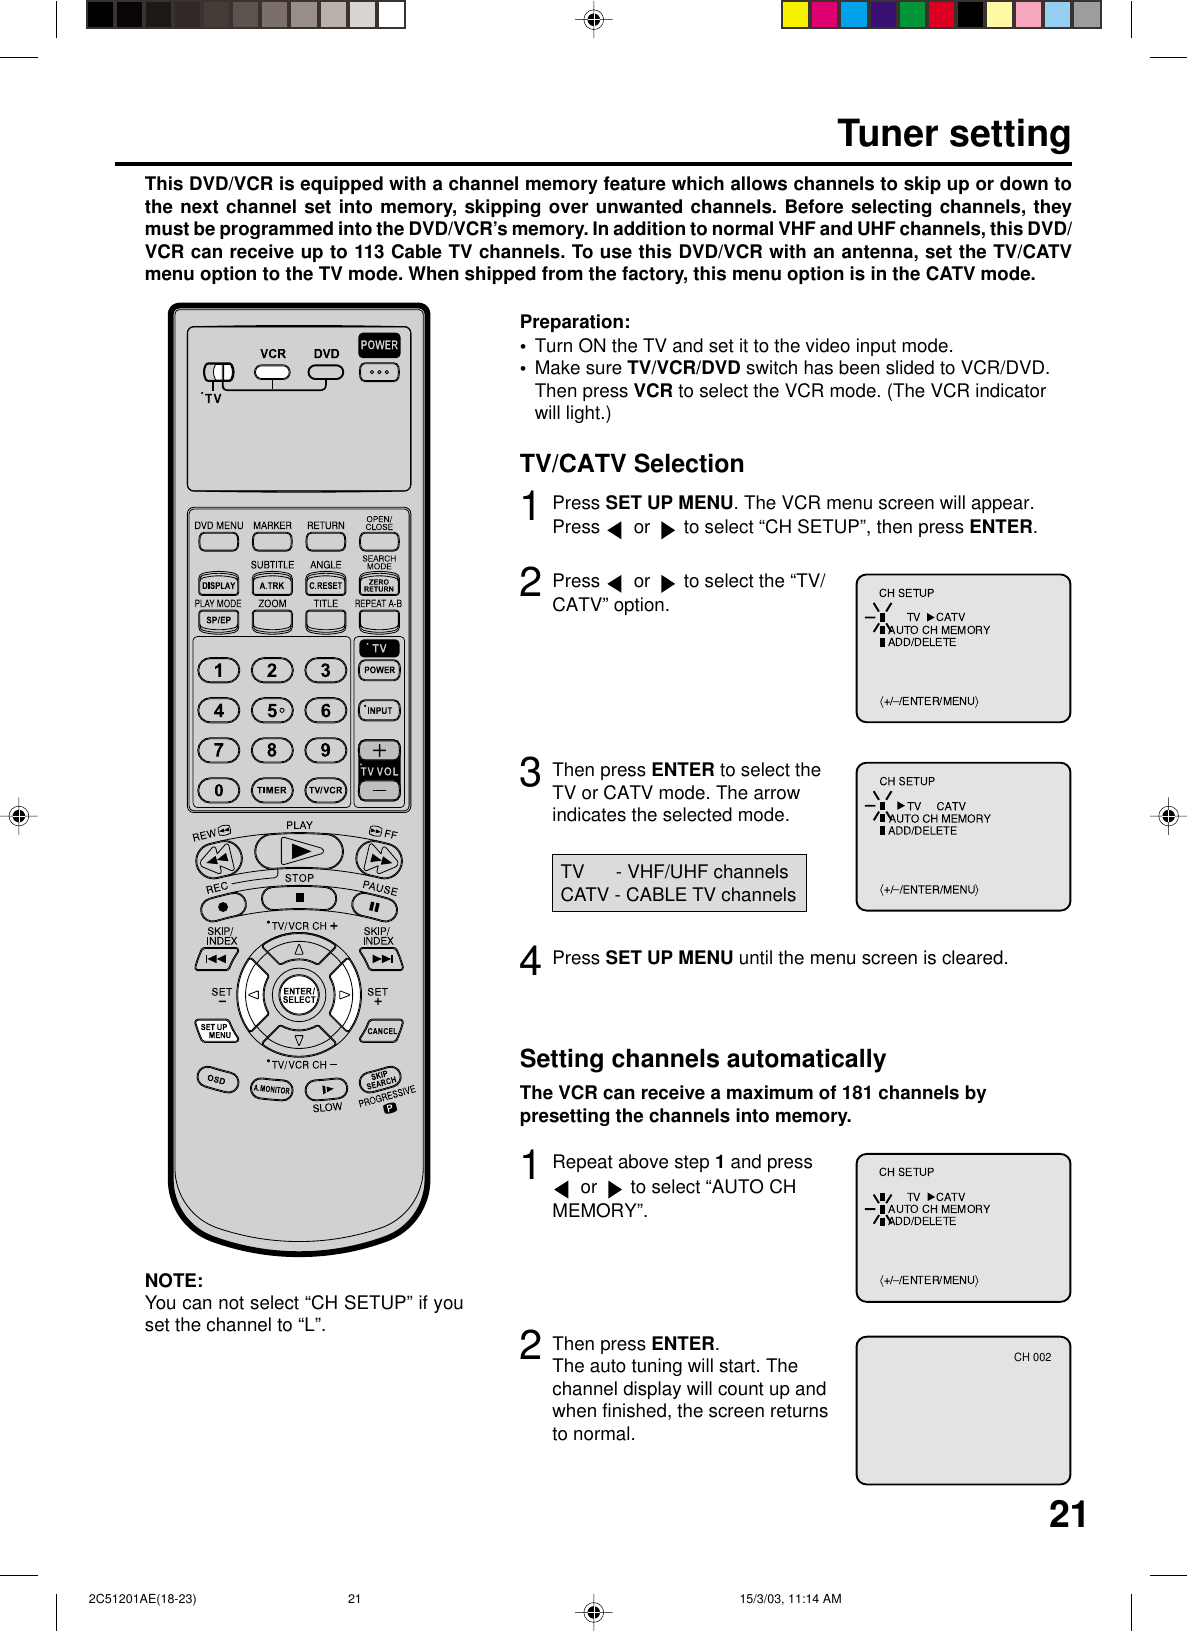 213Tuner settingThis DVD/VCR is equipped with a channel memory feature which allows channels to skip up or down tothe next channel set into memory, skipping over unwanted channels. Before selecting channels, theymust be programmed into the DVD/VCR’s memory. In addition to normal VHF and UHF channels, this DVD/VCR can receive up to 113 Cable TV channels. To use this DVD/VCR with an antenna, set the TV/CATVmenu option to the TV mode. When shipped from the factory, this menu option is in the CATV mode.Press SET UP MENU. The VCR menu screen will appear.Press   or   to select “CH SETUP”, then press ENTER.Then press ENTER to select theTV or CATV mode. The arrowindicates the selected mode.12Press   or   to select the “TV/CATV” option.4Press SET UP MENU until the menu screen is cleared.TV      - VHF/UHF channelsCATV - CABLE TV channels2Setting channels automaticallyThe VCR can receive a maximum of 181 channels bypresetting the channels into memory.Then press ENTER.The auto tuning will start. Thechannel display will count up andwhen finished, the screen returnsto normal.1Repeat above step 1 and press or   to select “AUTO CHMEMORY”.TV/CATV SelectionTurn ON the TV and set it to the video input mode.Make sure TV/VCR/DVD switch has been slided to VCR/DVD.Then press VCR to select the VCR mode. (The VCR indicatorwill light.)Preparation:••CH 002You can not select “CH SETUP” if youset the channel to “L”.NOTE: 2C51201AE(18-23) 15/3/03, 11:14 AM21